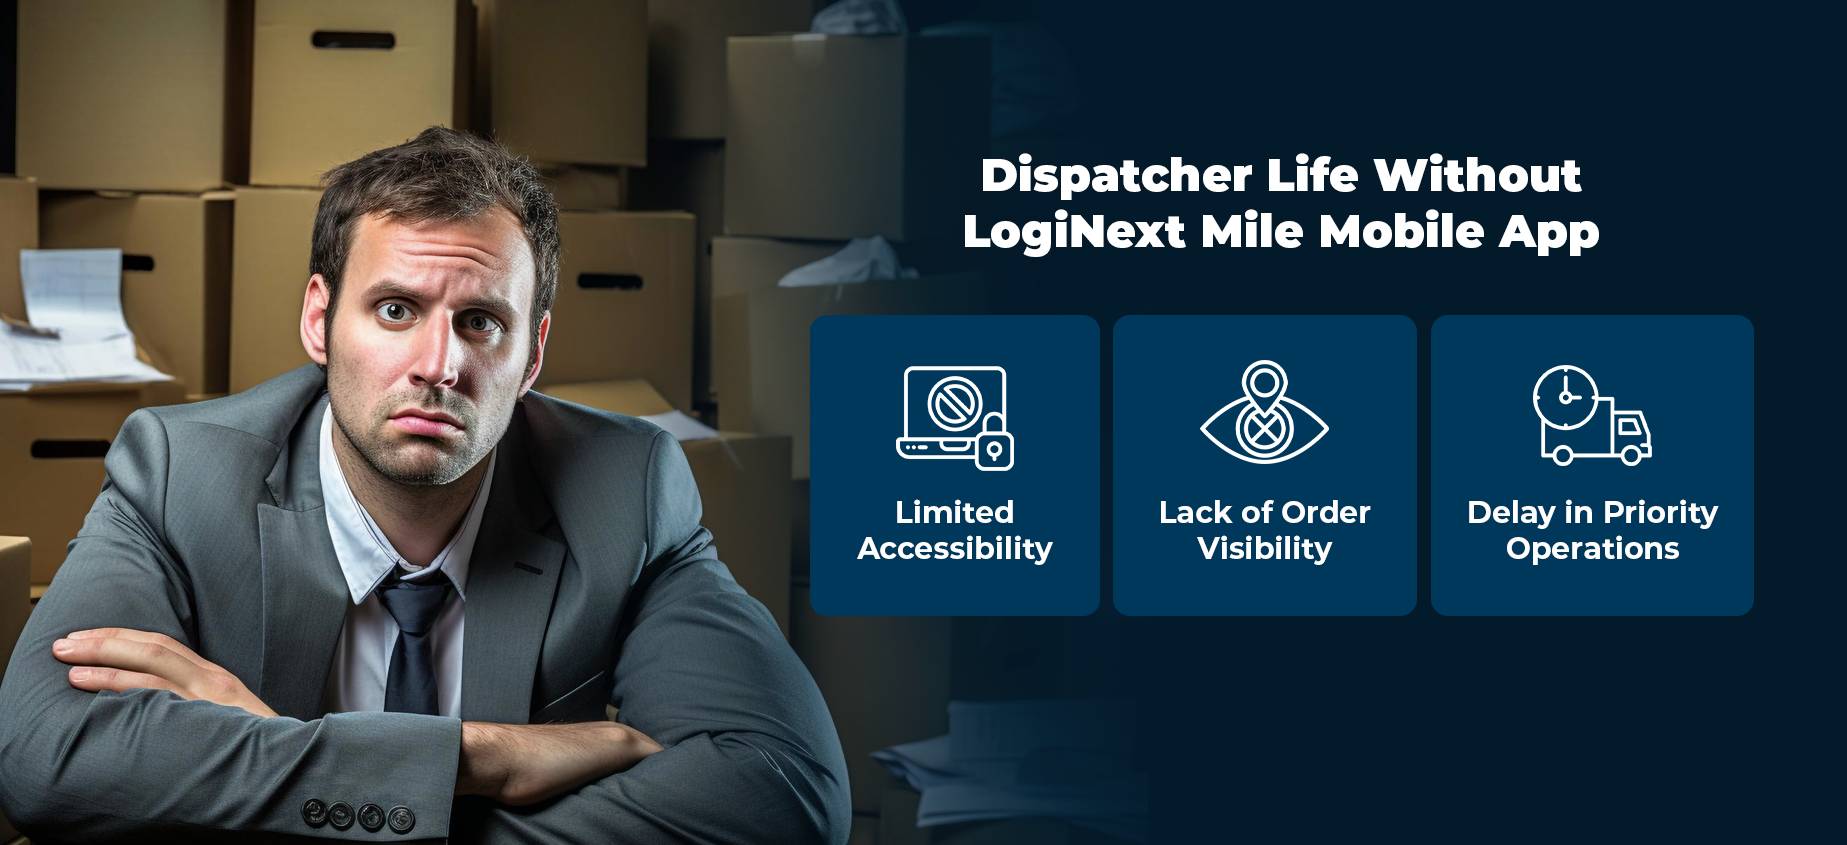 Dispatcher Life Without Mile Mobile App